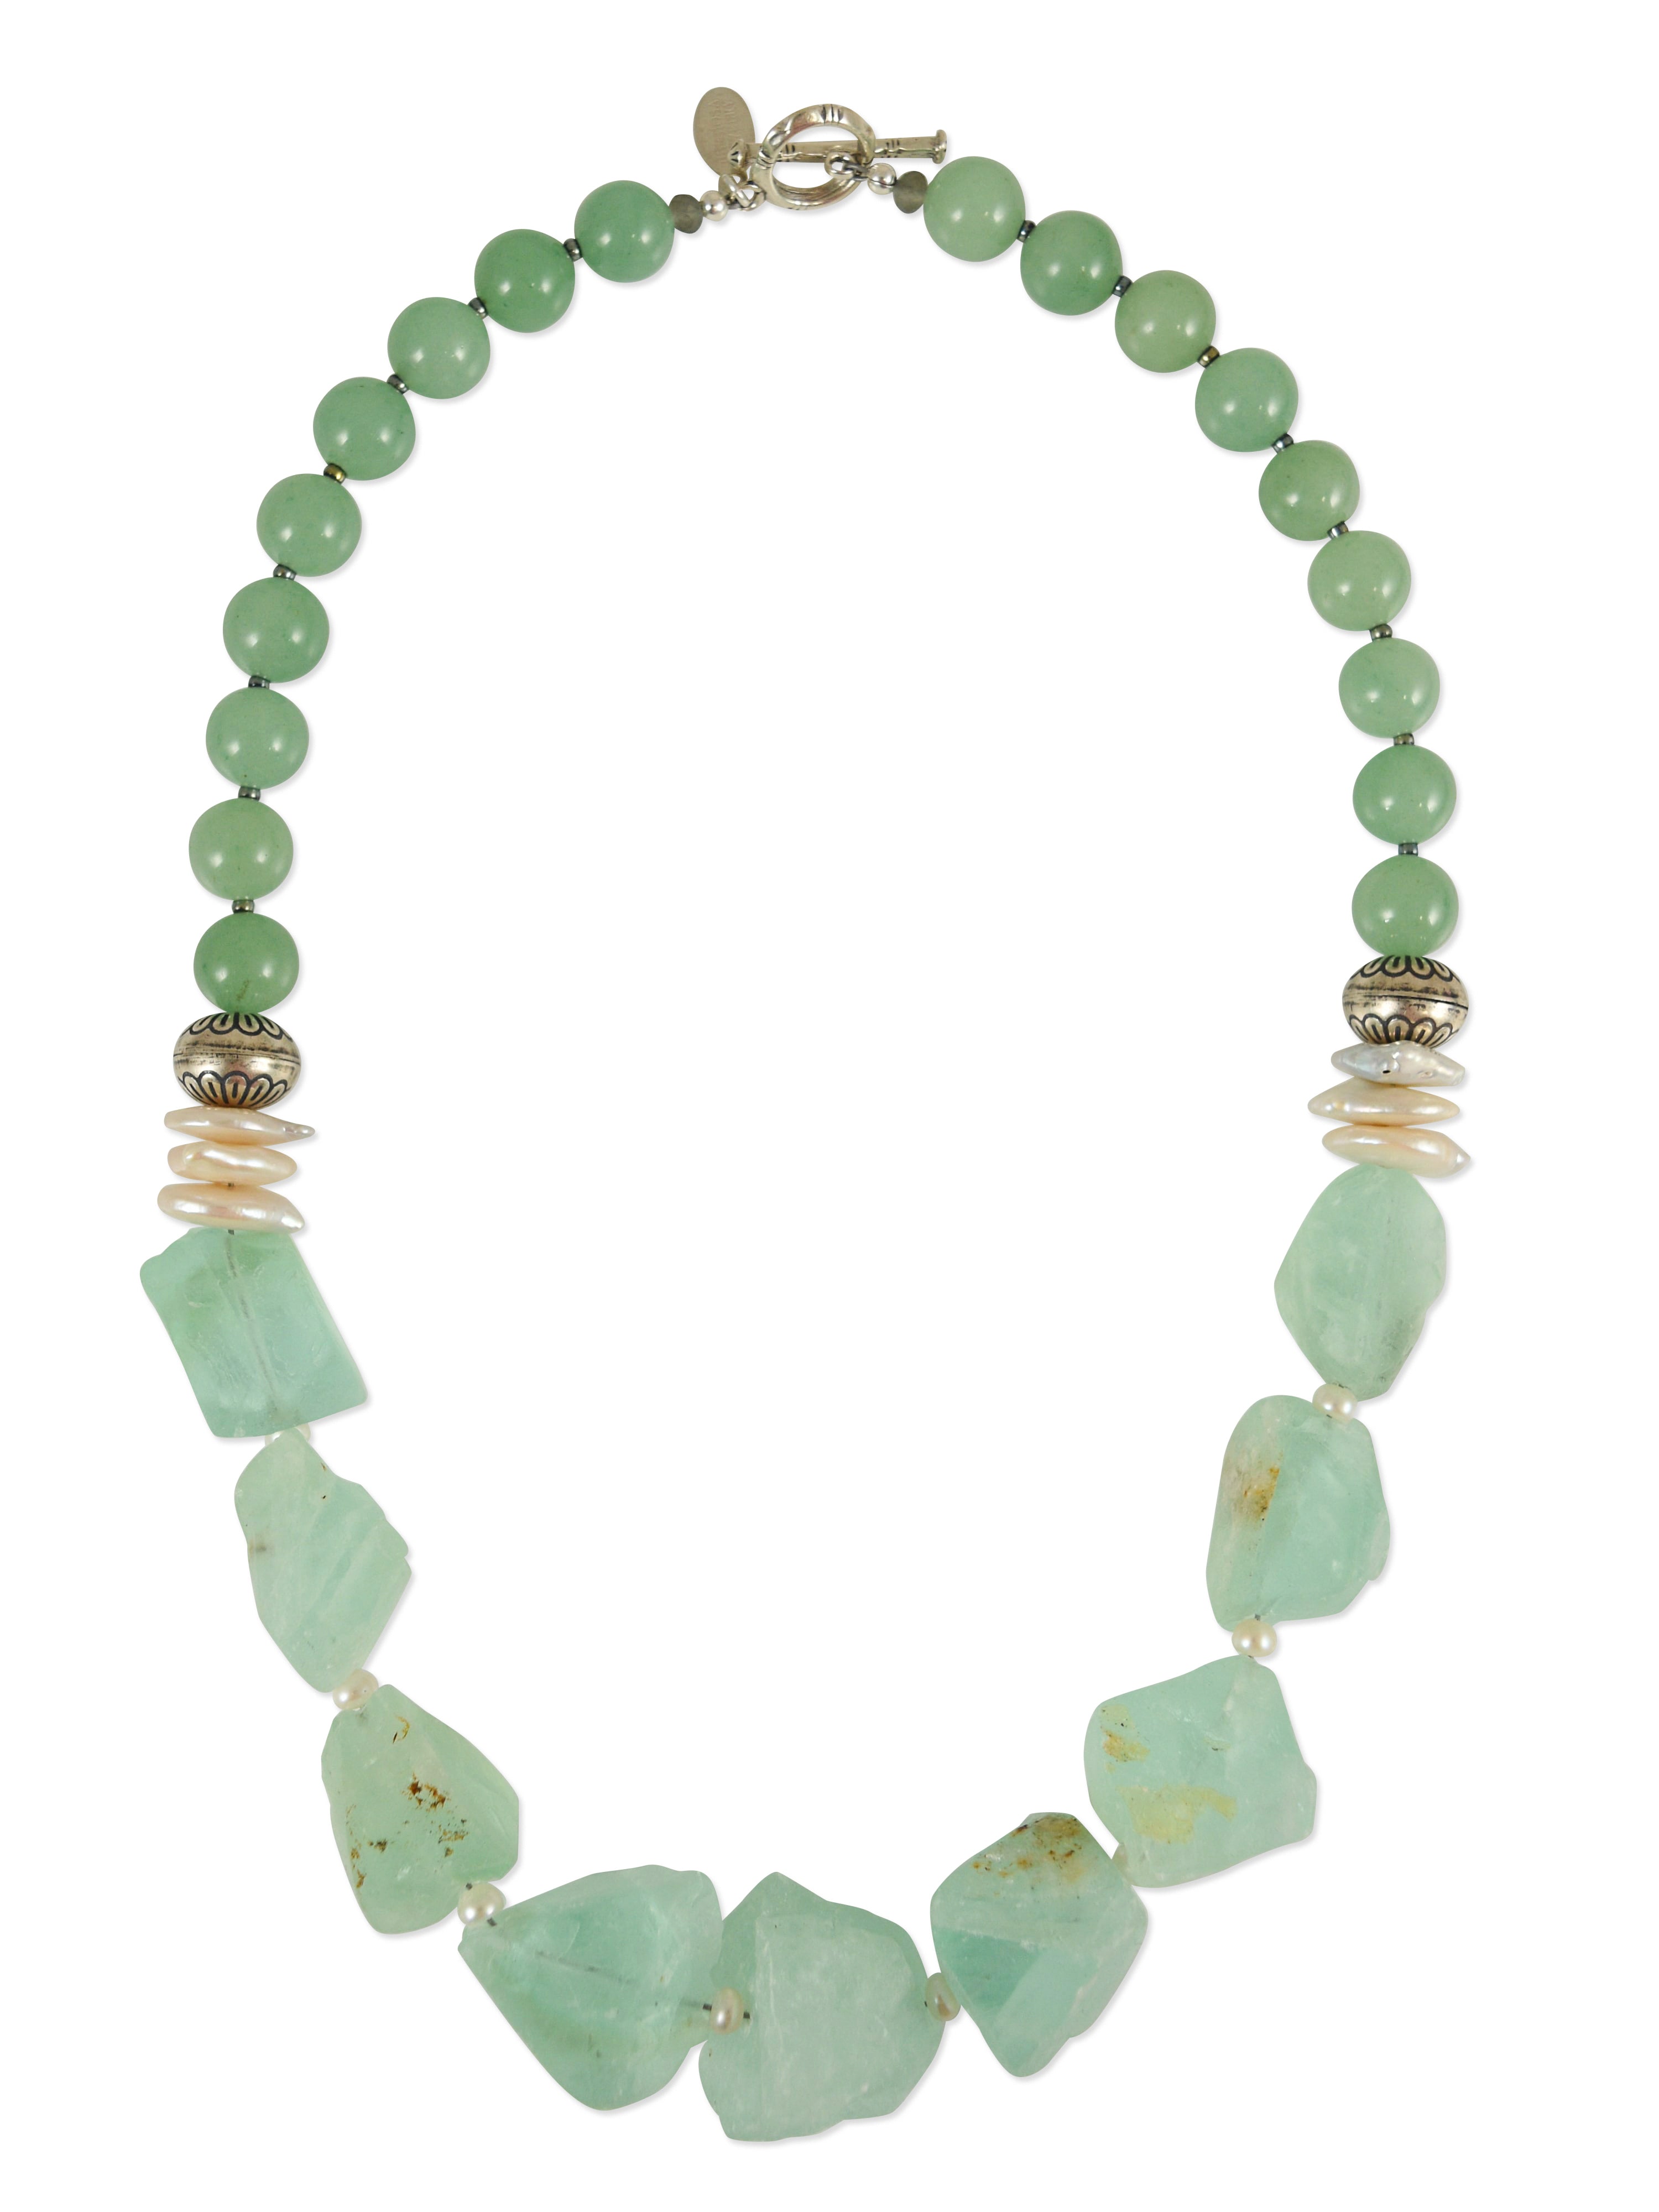 Rock Candy Necklace in Green Quartz